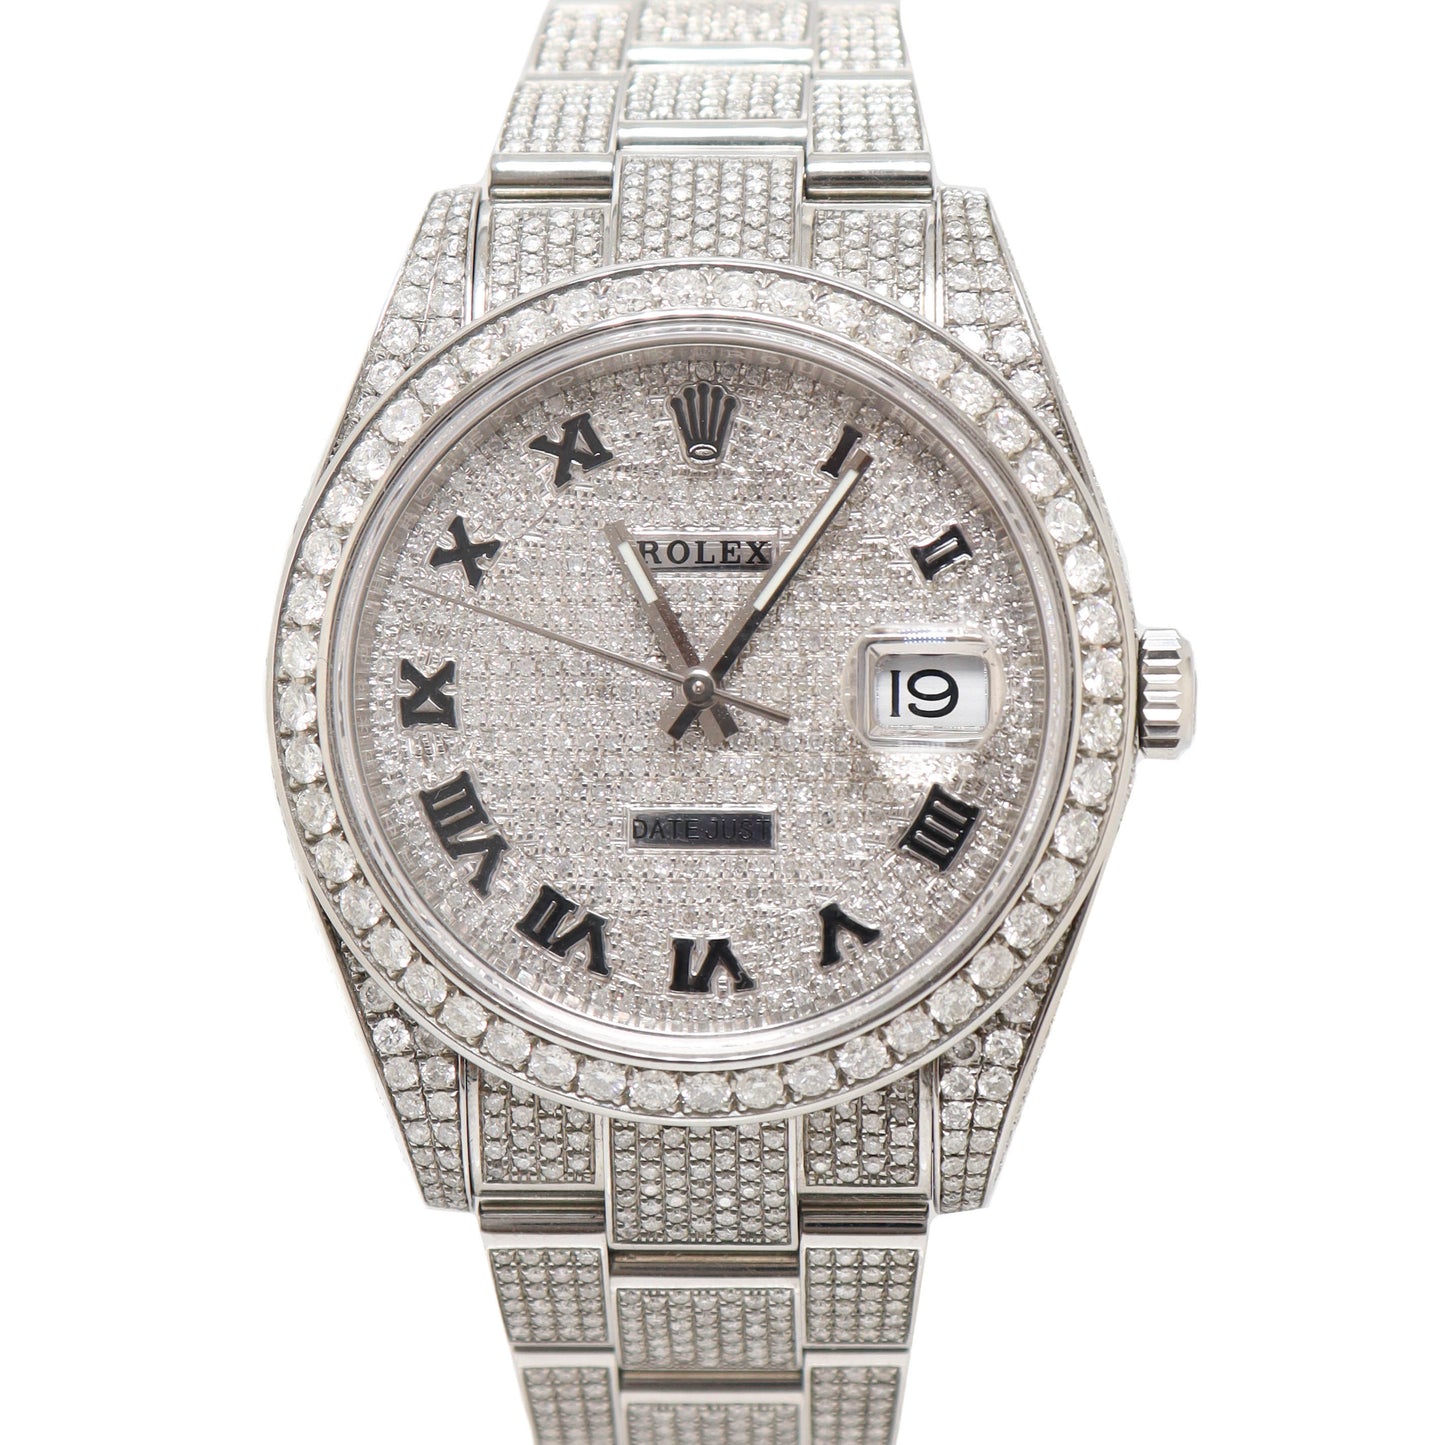 Rolex Mens Datejust Fully Iced Out Case 41mm Pave Roman Dial Watch Reference# 126300 - Happy Jewelers Fine Jewelry Lifetime Warranty